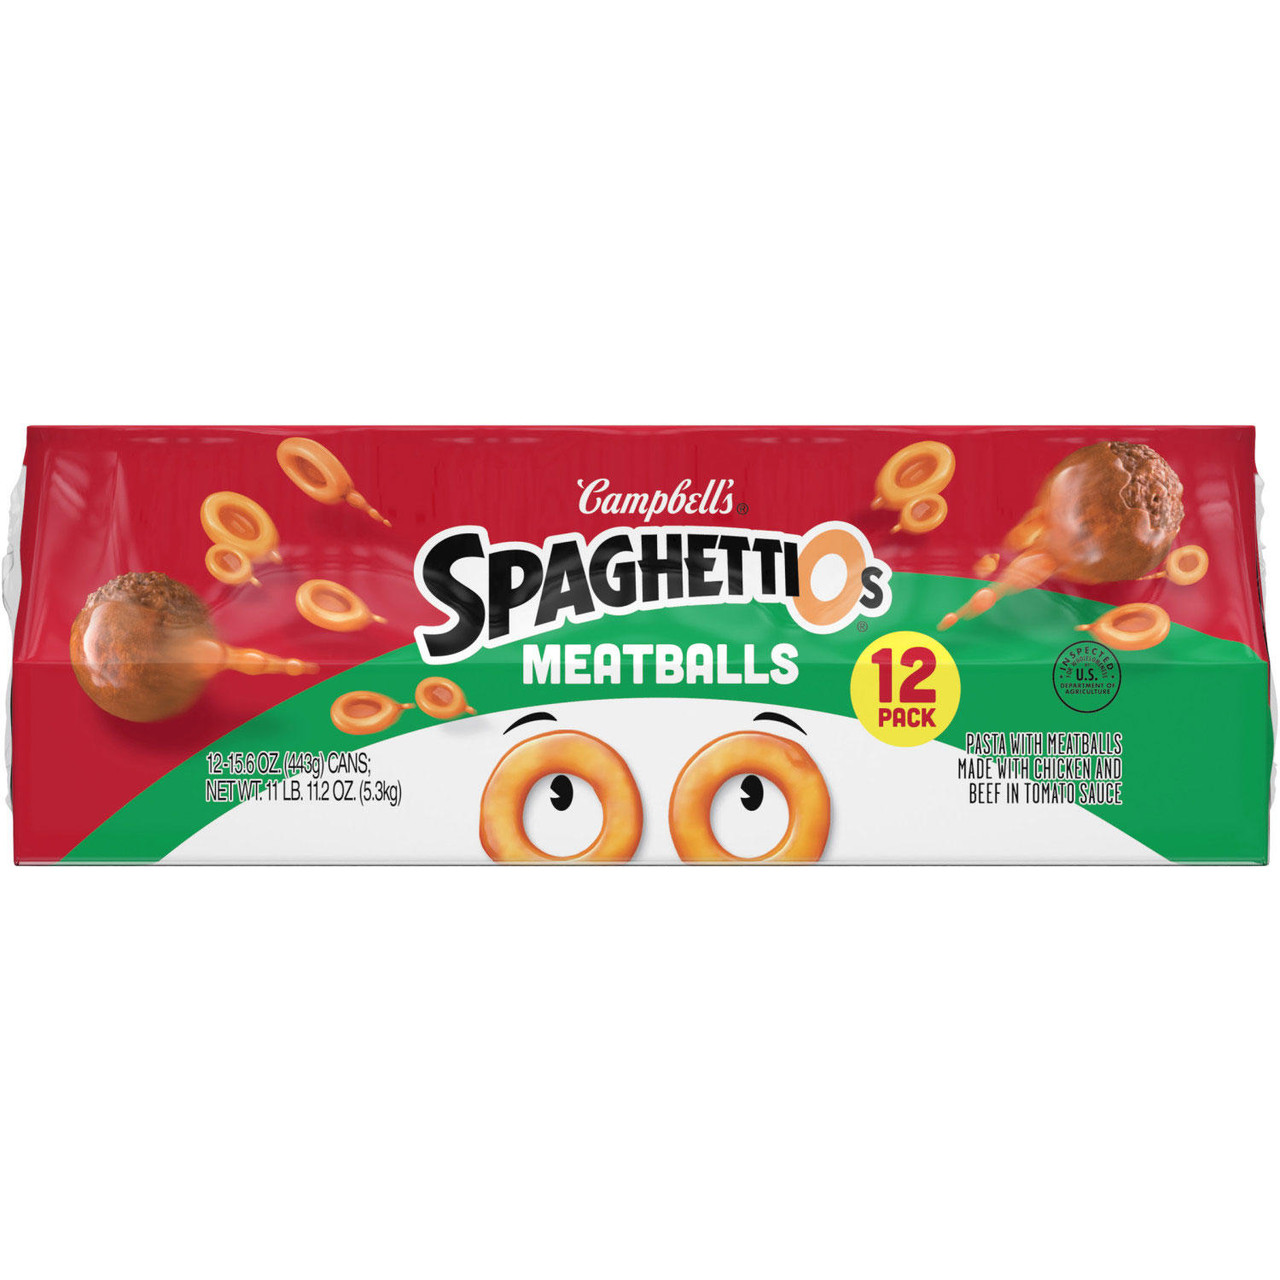 Campbell's SpaghettiOs Canned Pasta with Meatballs (15.6 oz., 12 pk.) - [From 58.00 - Choose pk Qty ] - *Ships from Miami